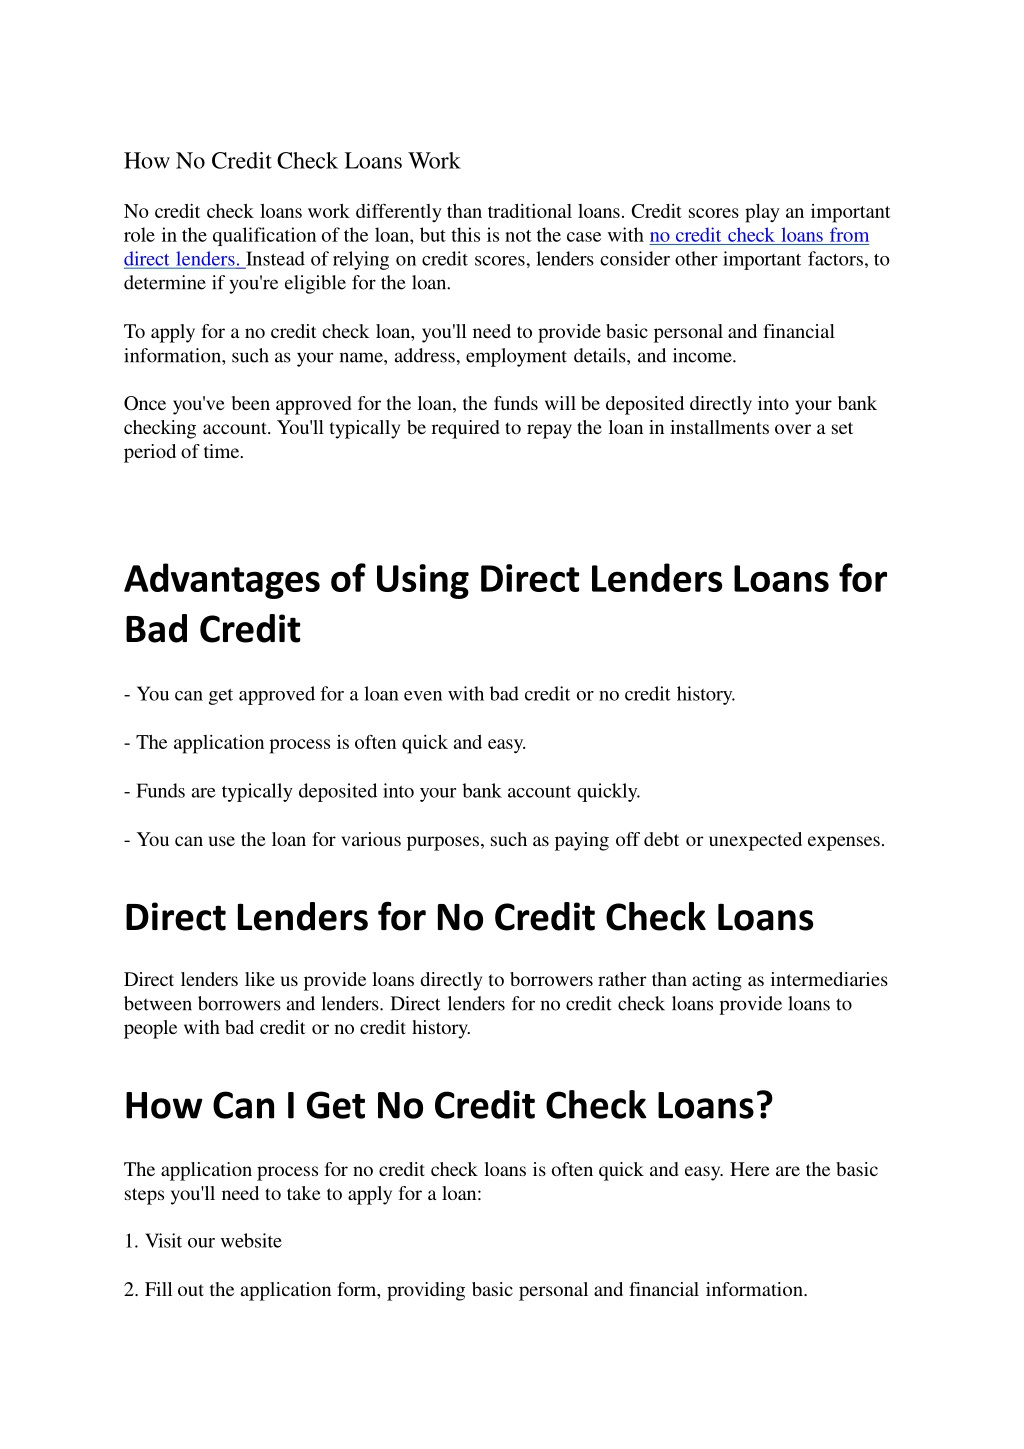 PPT - No Credit Check Loans from Direct Lenders - CashAmericaToday PowerPoint Presentation - ID:12226406